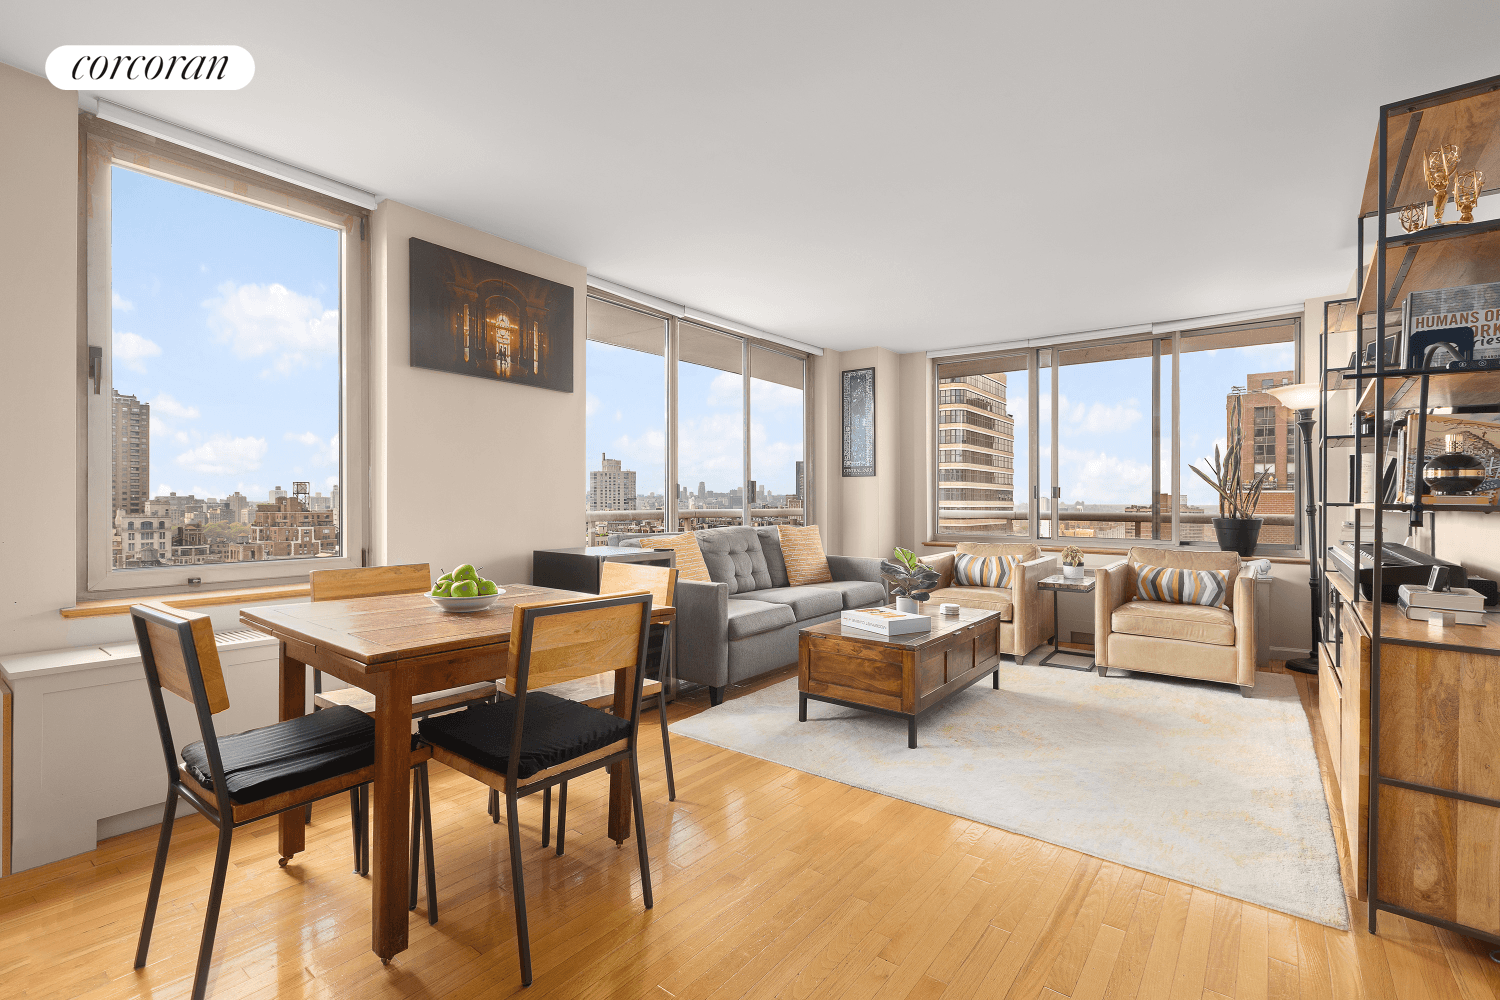 Welcome to the prestigious 200 East 89th Street where comfort meets elegance in the heart of Upper East Side, NYC.